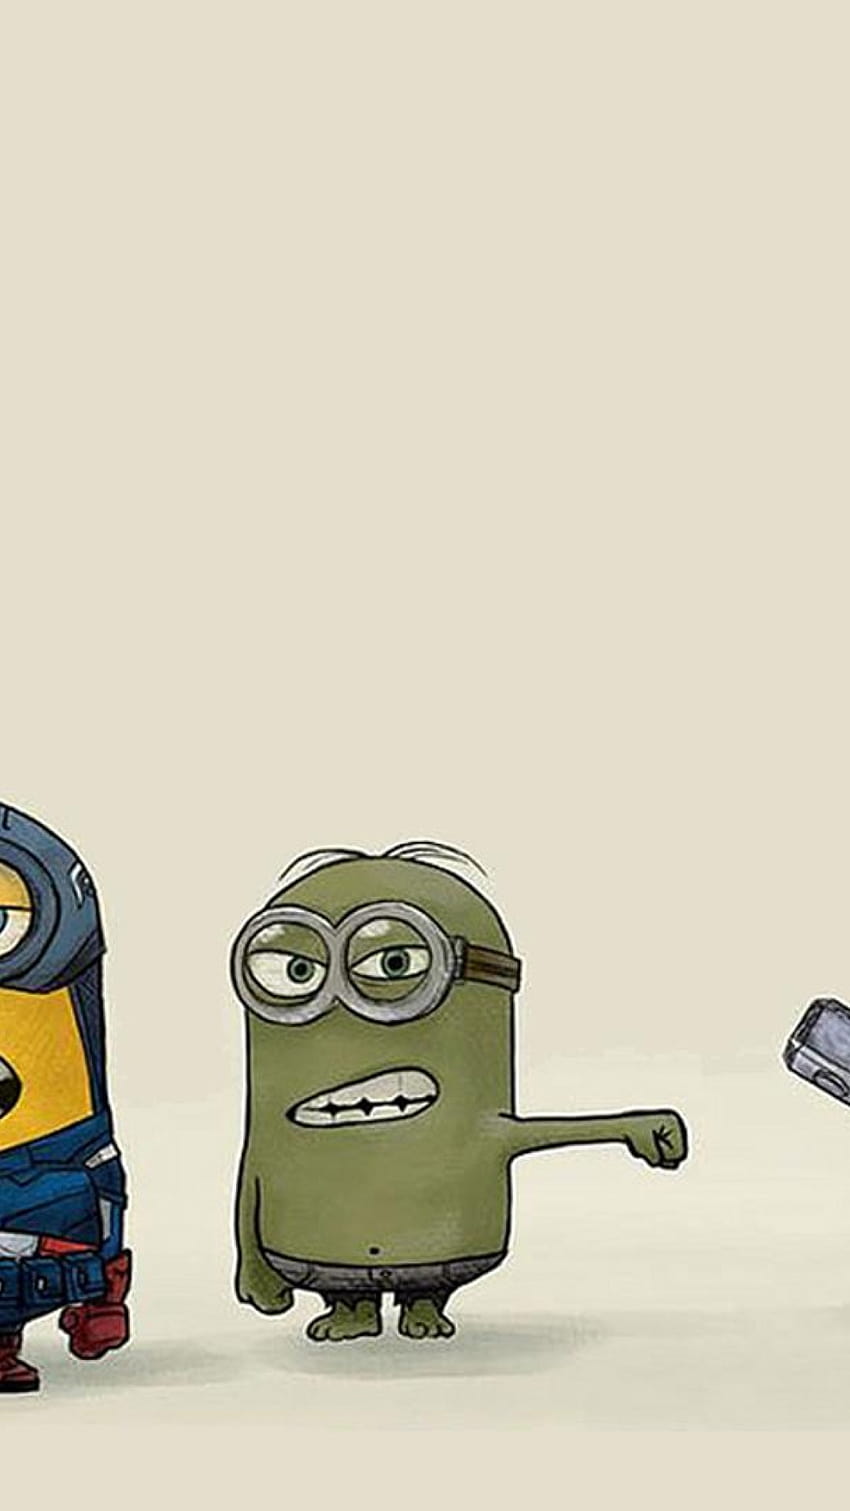 Minions Avengers available in different dimensions iPhone 6 / 6S Plus, minion avengers HD phone wallpaper